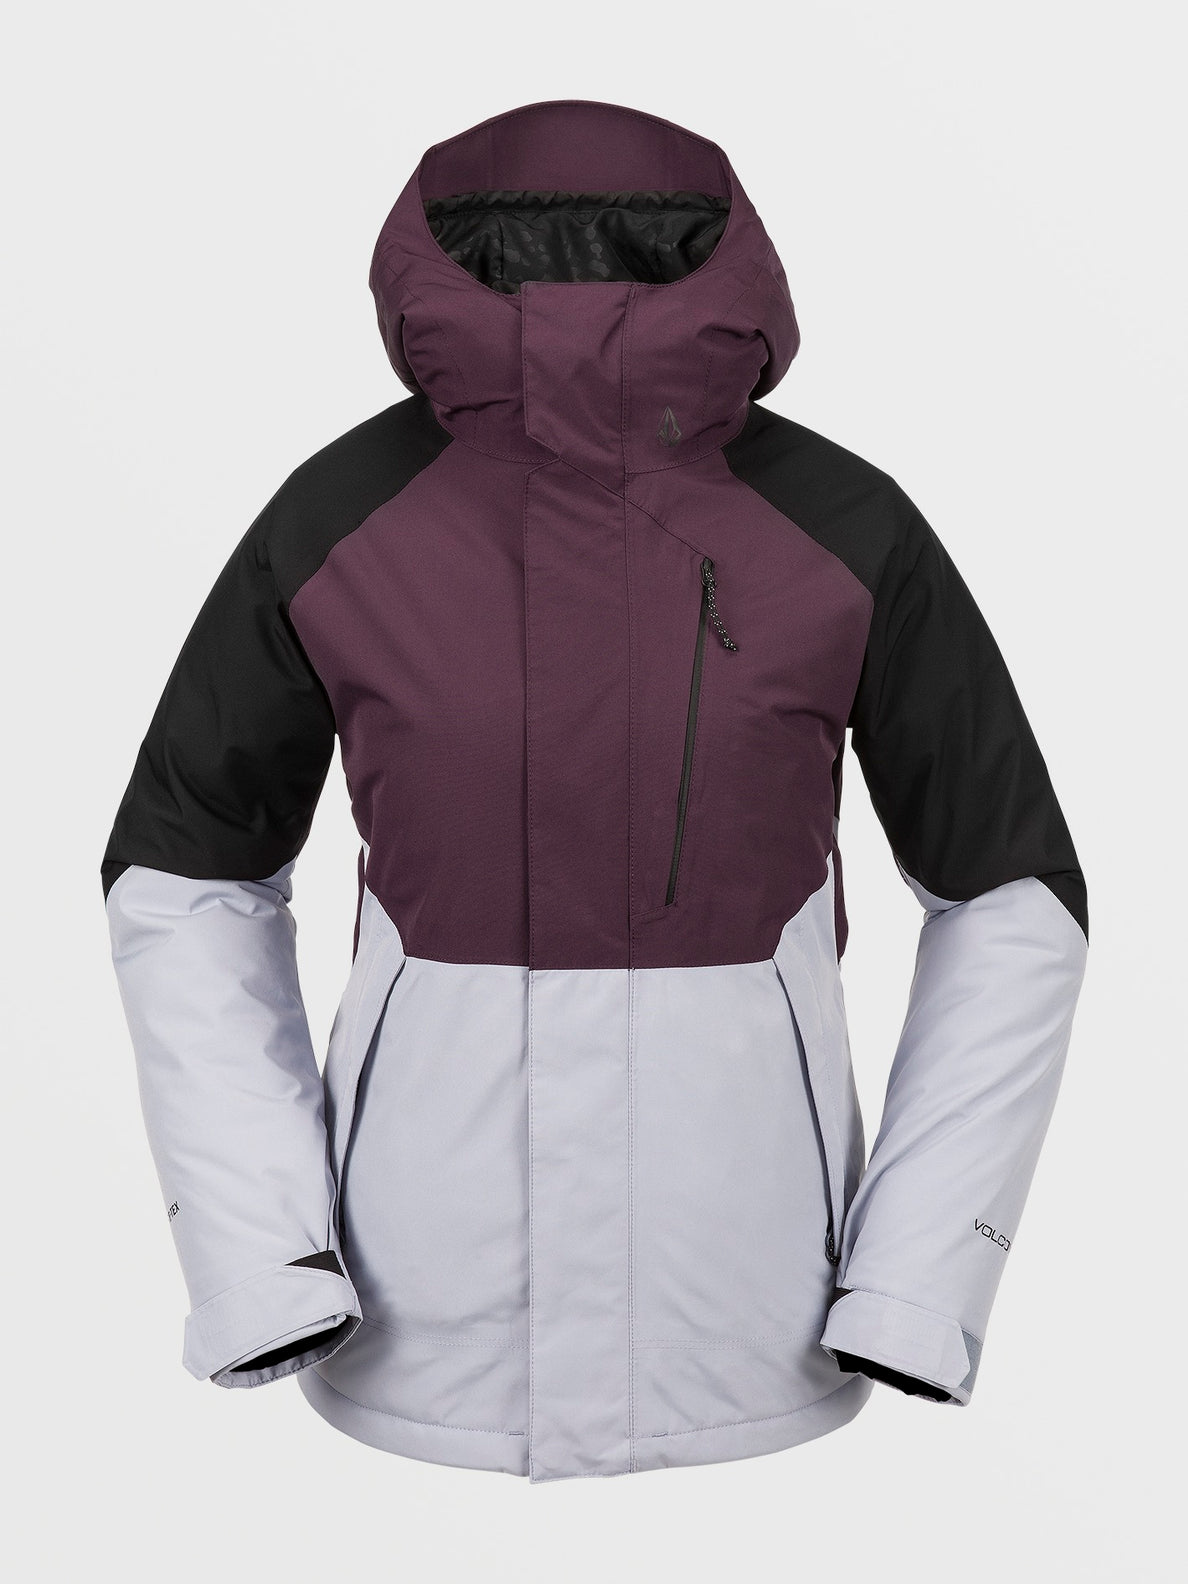 Womens V.Co Aris Insulated Gore Jacket - Blackberry (H0452405_BRY) [F]